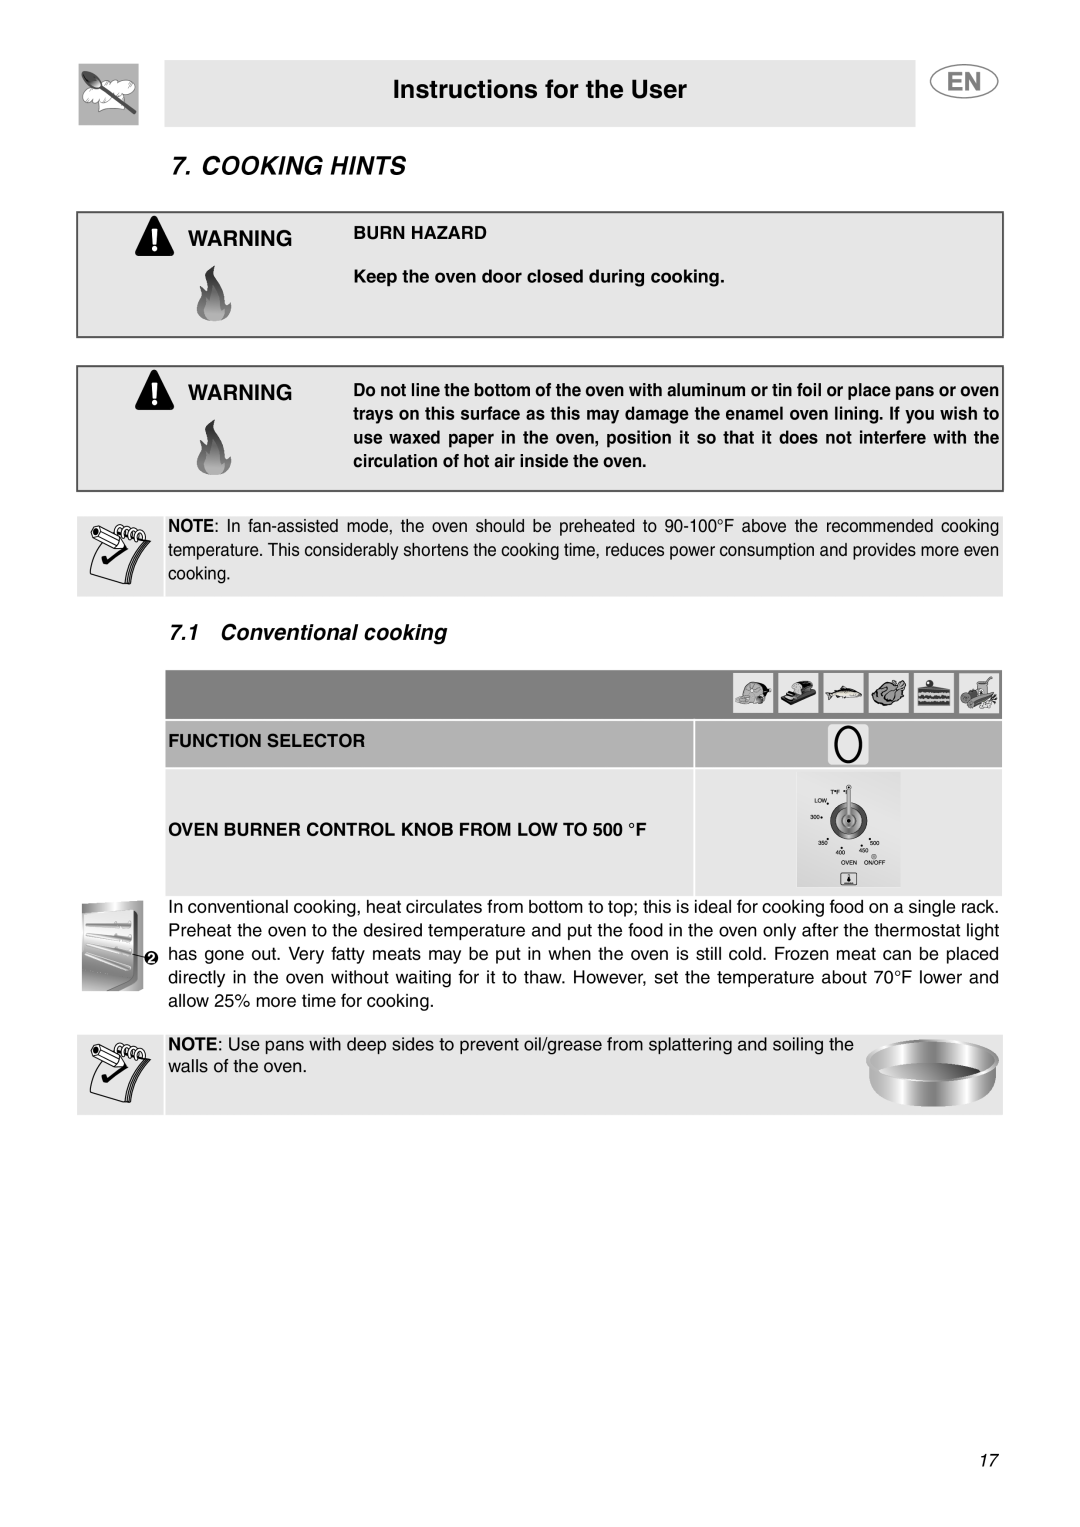 Smeg C6GGXU Cooking Hints, Conventional cooking, Instructions for the User, Burn Hazard, Function Selector 